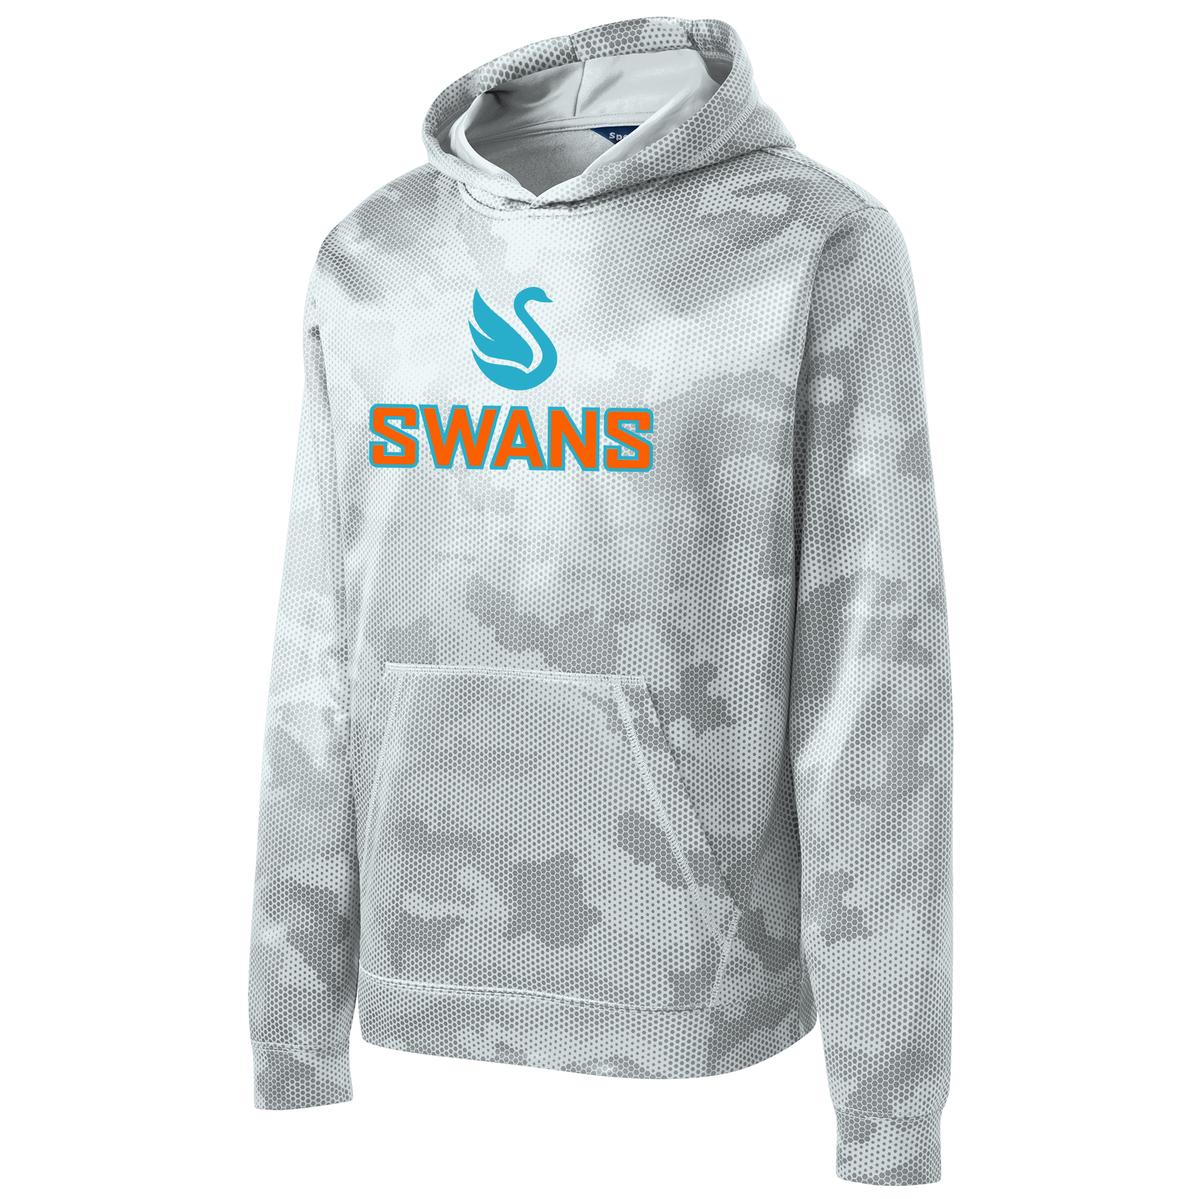 Swans Lacrosse Youth CamoHex Pullover